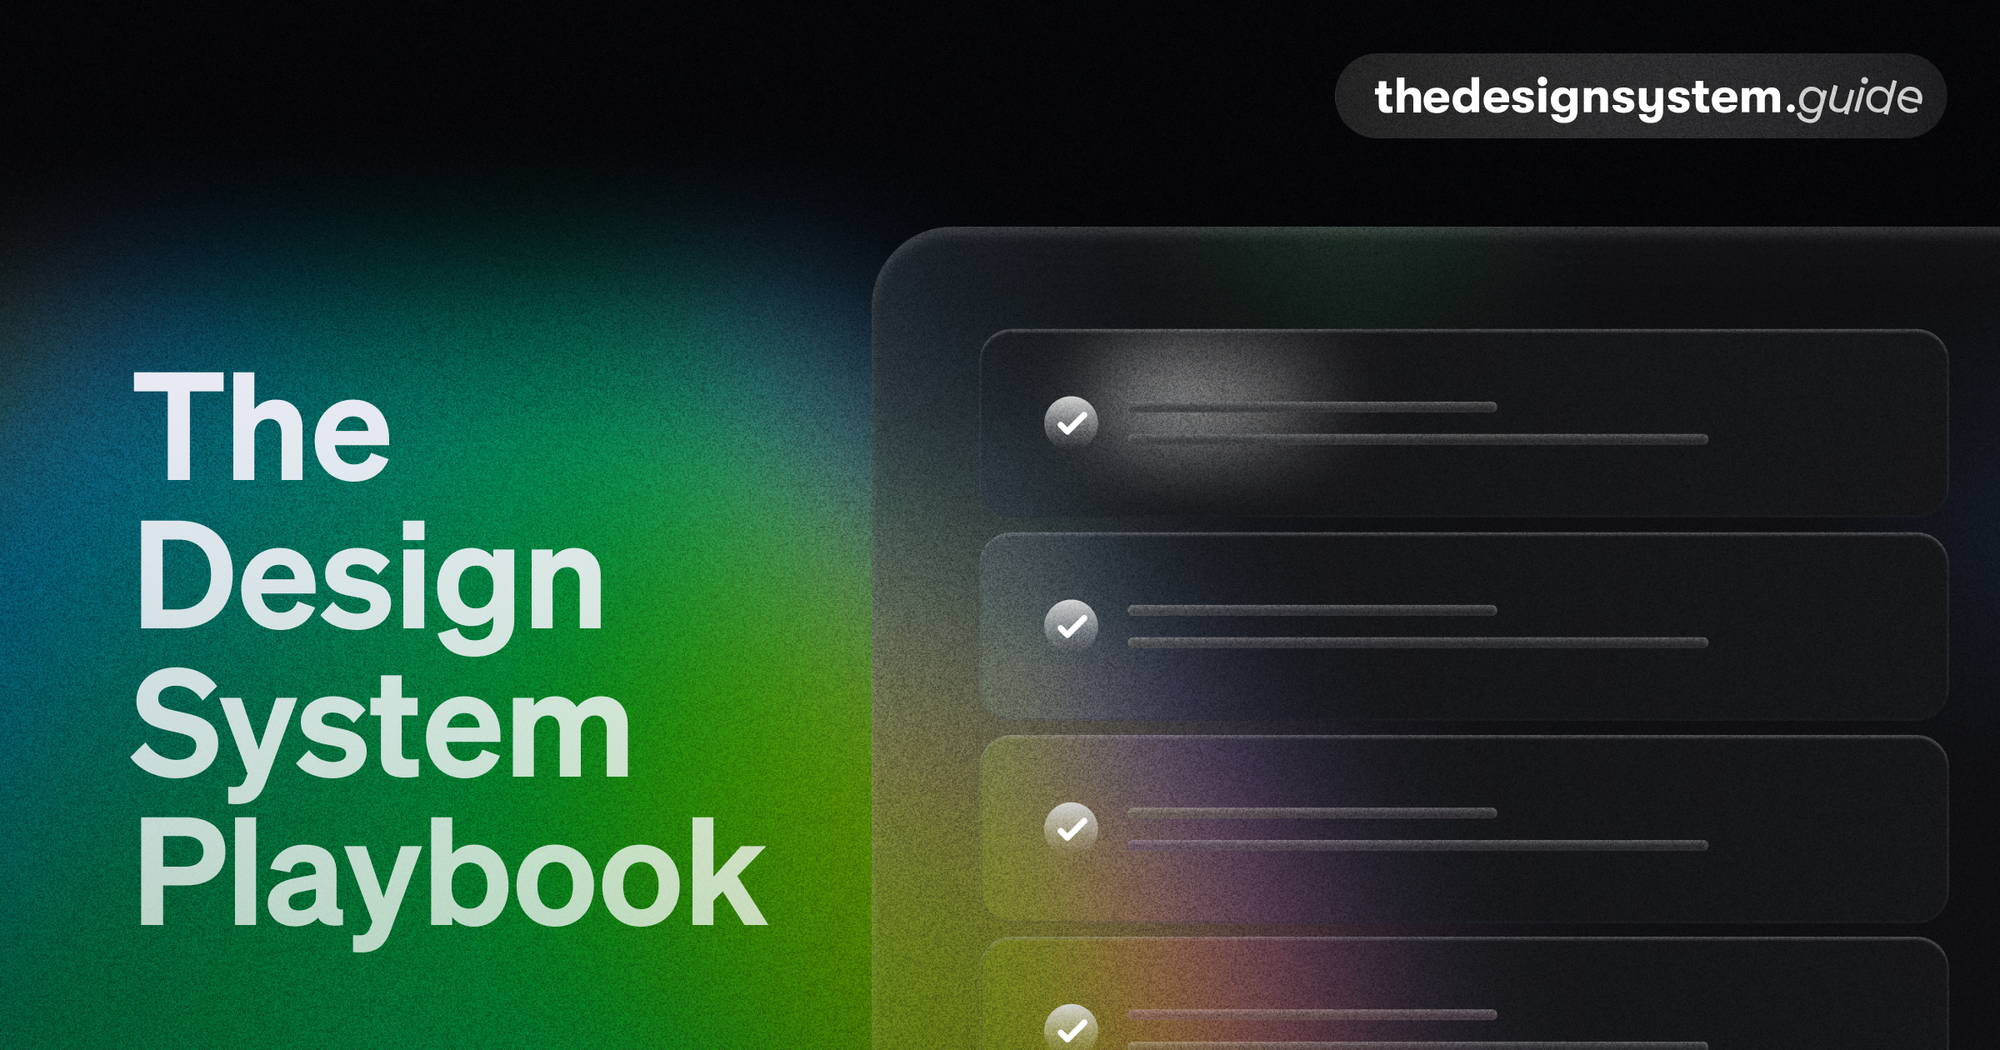 The Design System Playbook